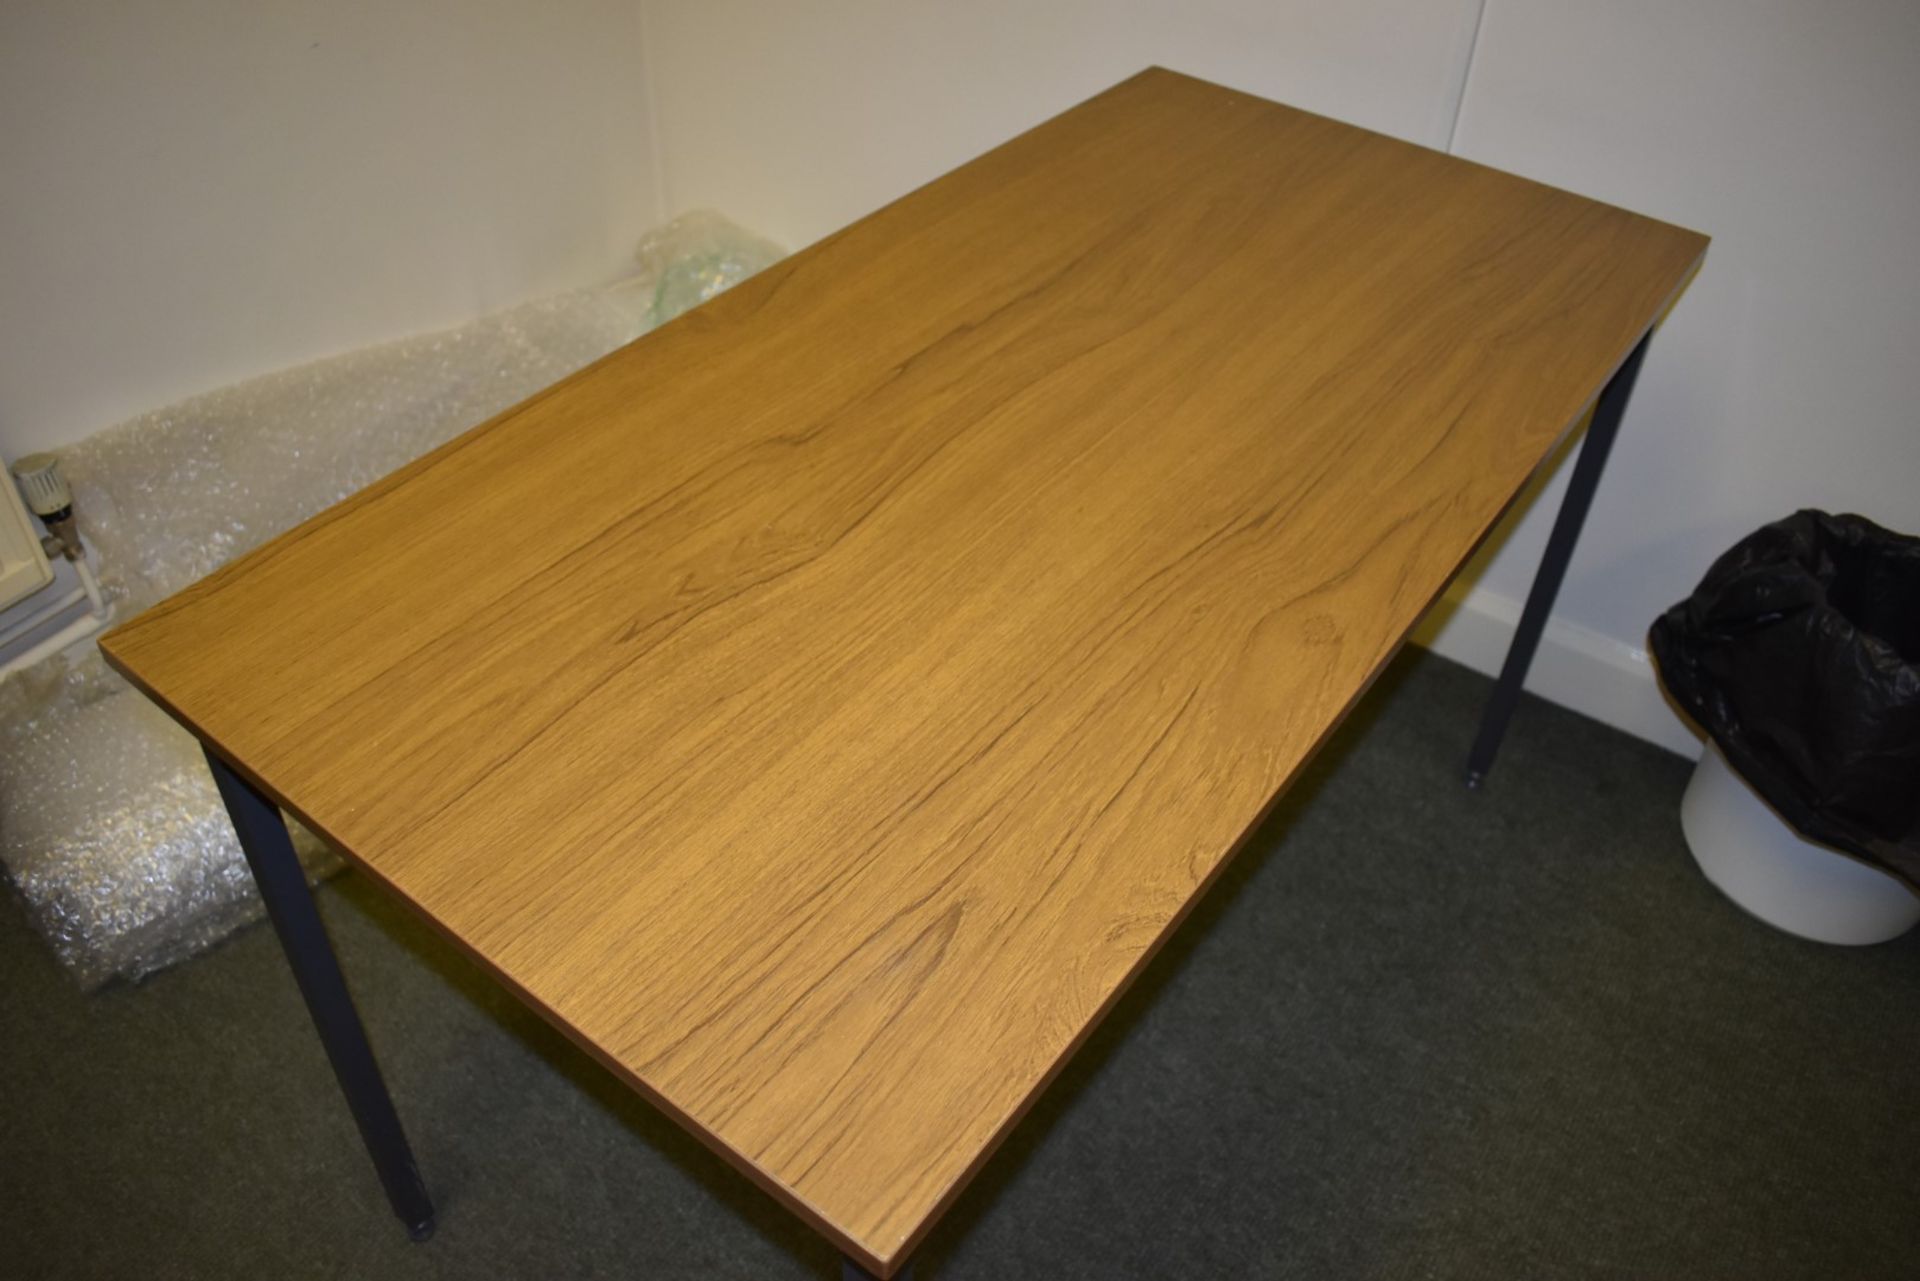 1 x Assorted Collection of Office Furniture to Include Office Desk, Table, Coat Hanger, Waste Bin - Image 7 of 9